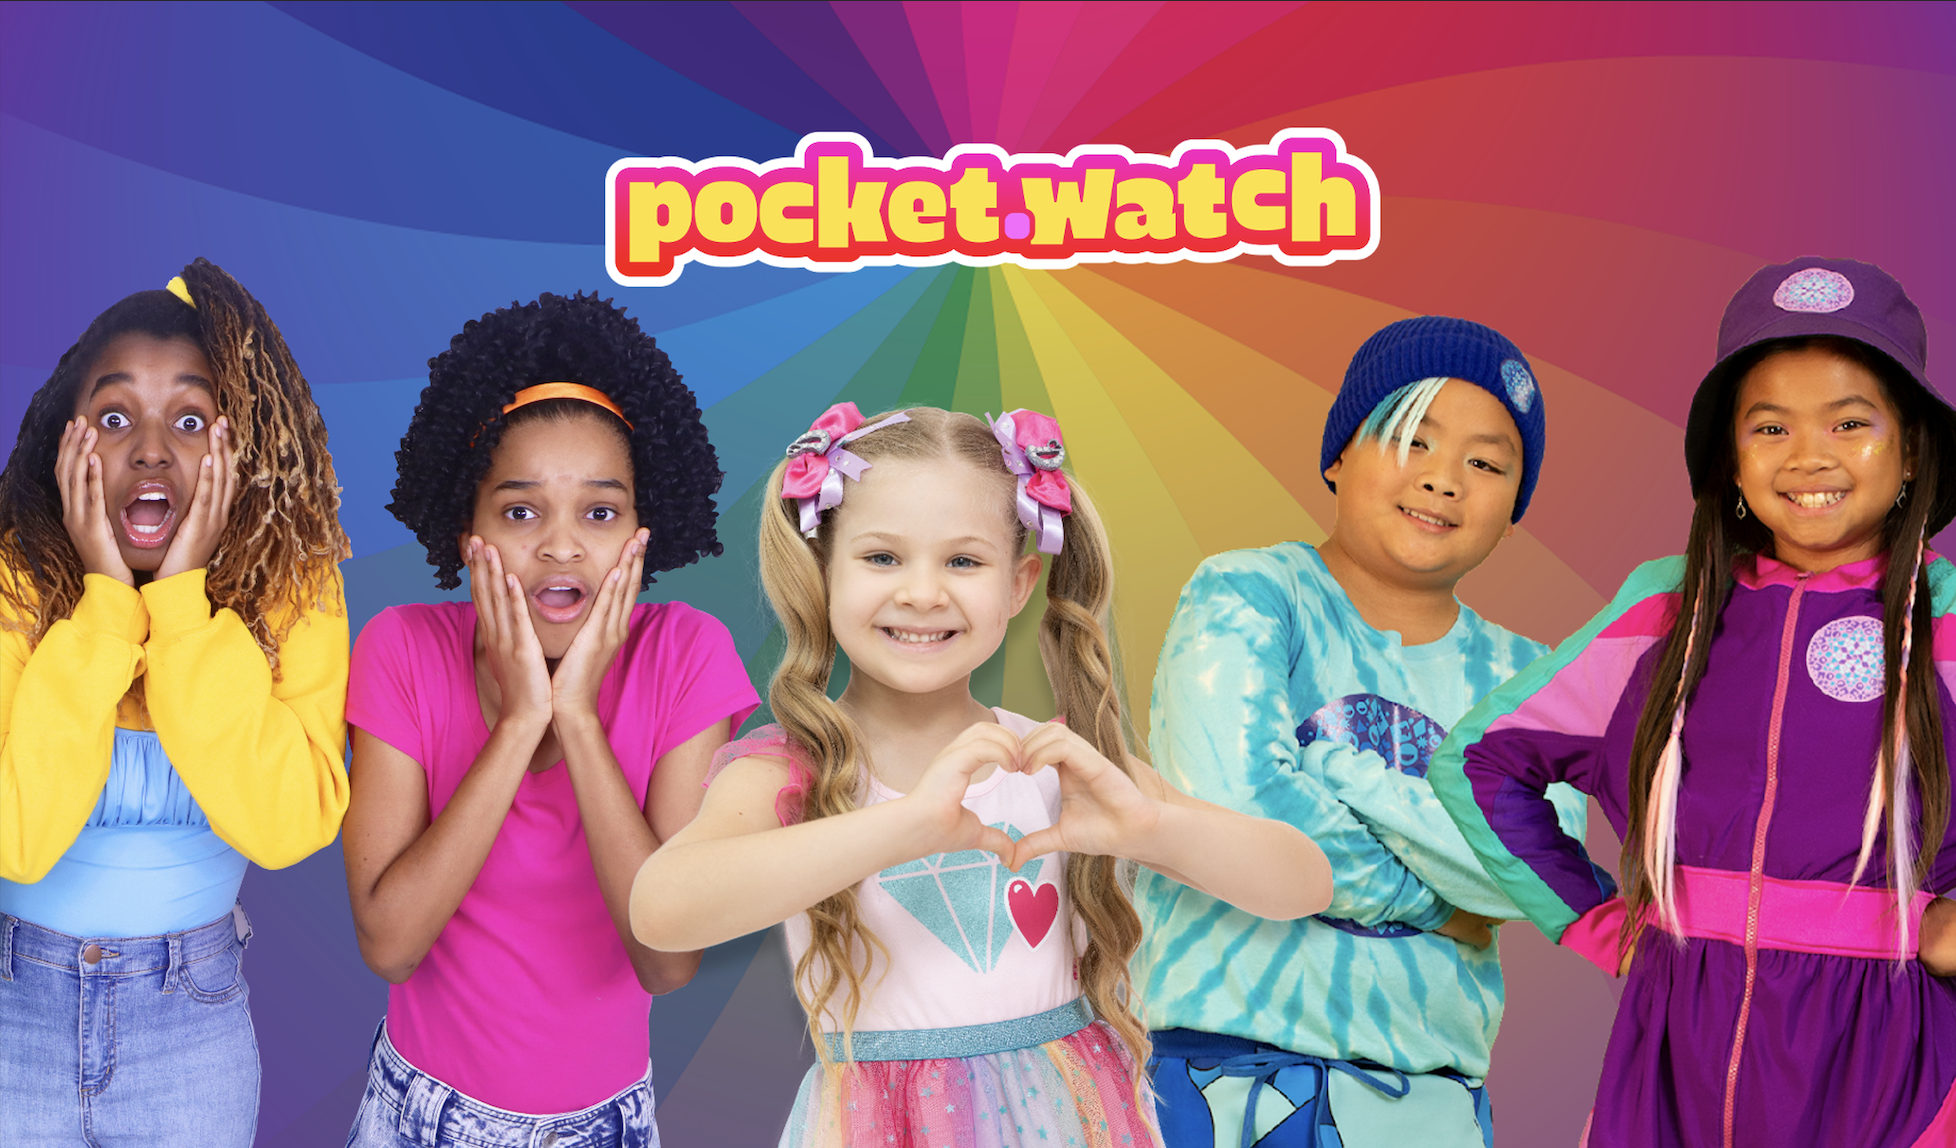 POCKET.WATCH AND UNIVERSAL MUSIC GROUP PARTNER TO RELEASE THE STUDIO'S  POPULAR KIDS AND FAMILY CREATOR CATALOG FOR THE FIRST TIME - UMG